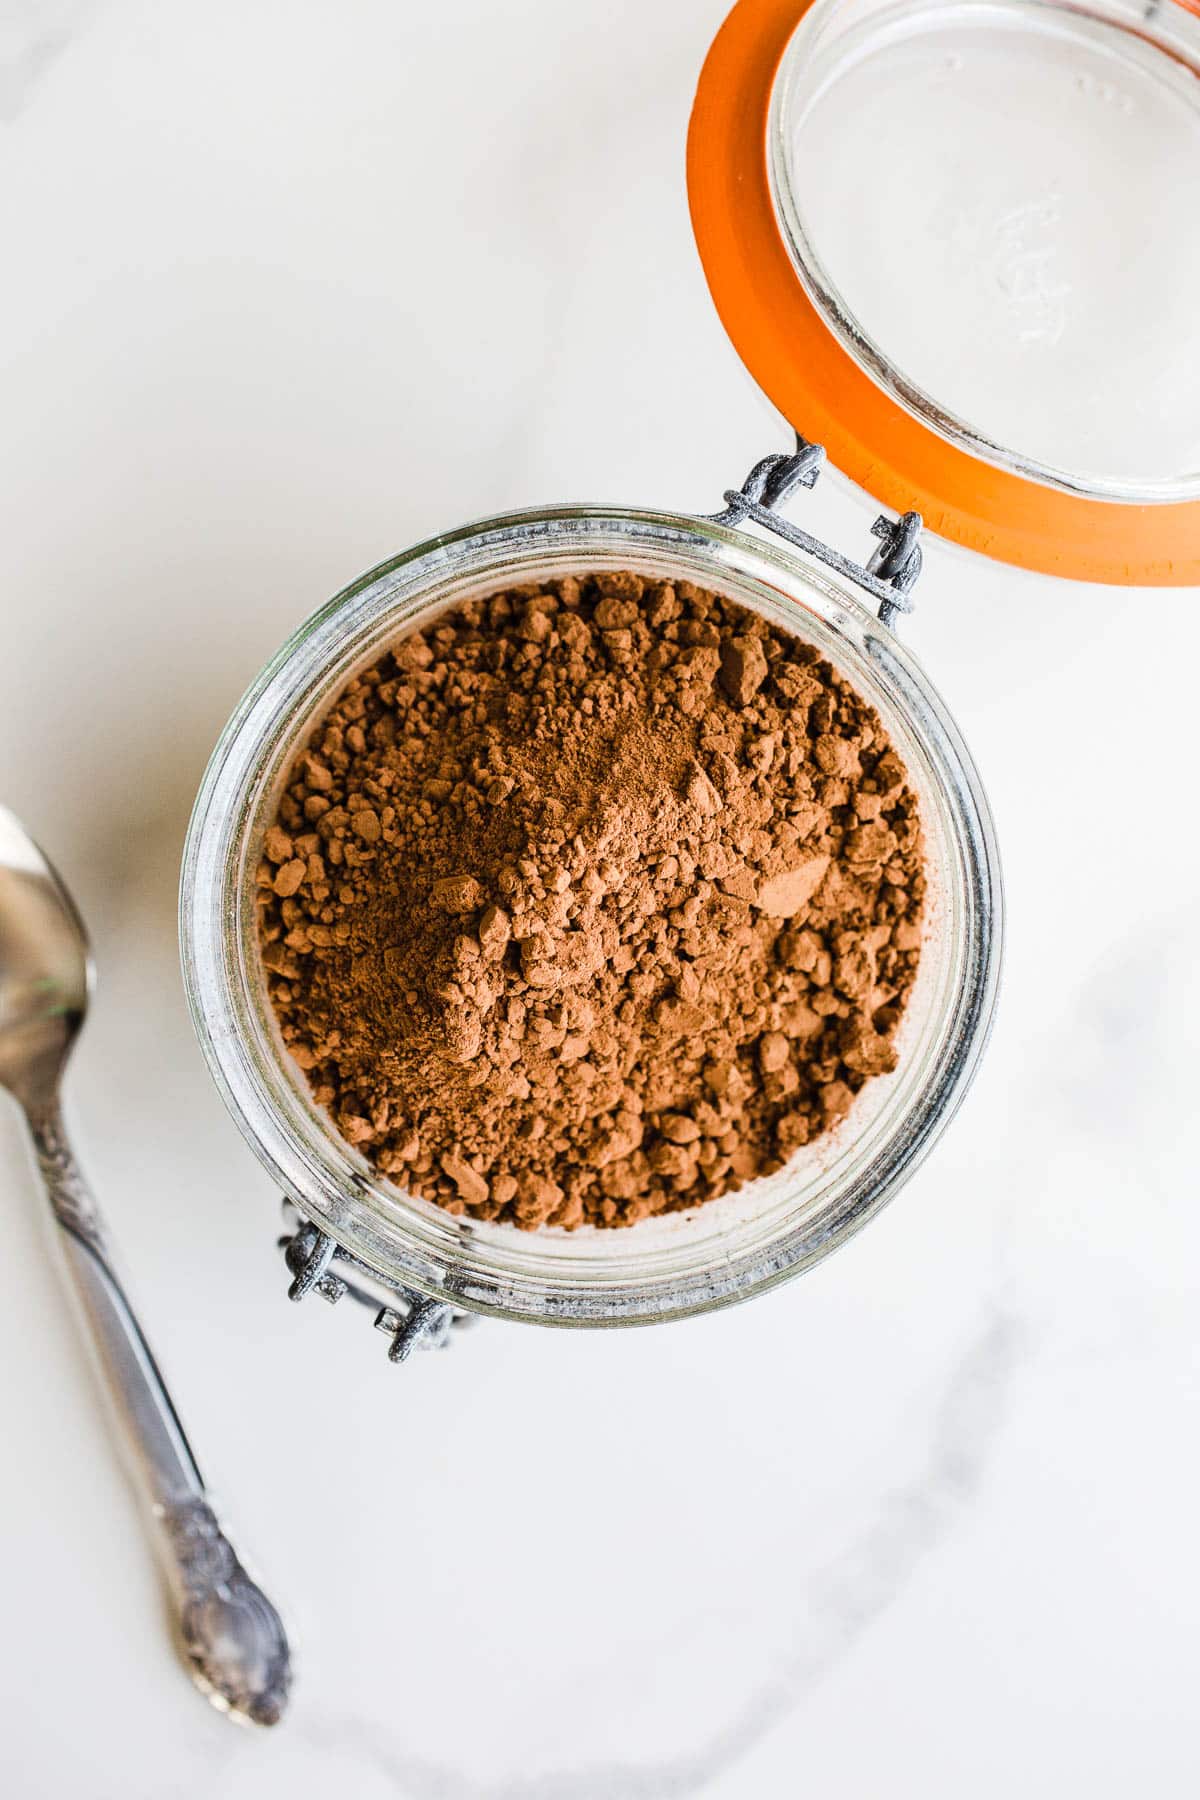 A glass canister of unsweetened cocoa powder.